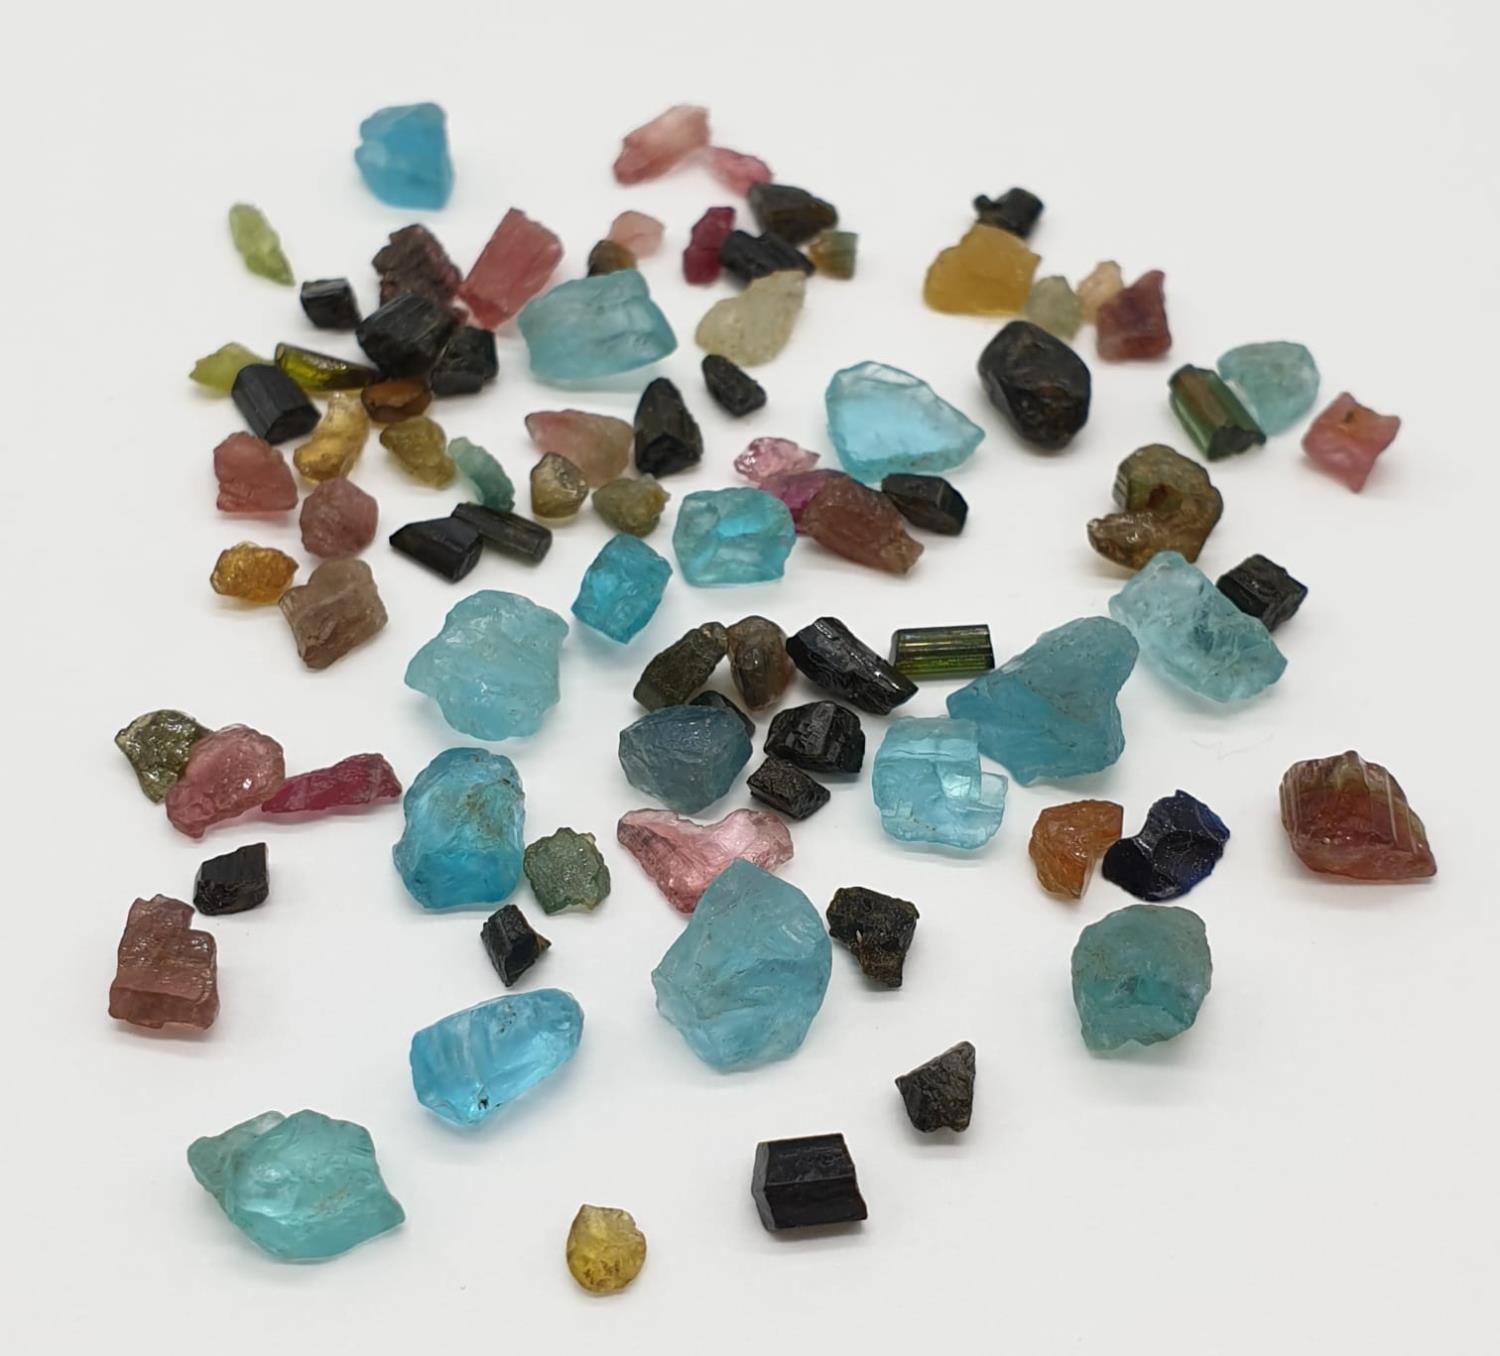 62cts rough tourmalines and apatite gemstone